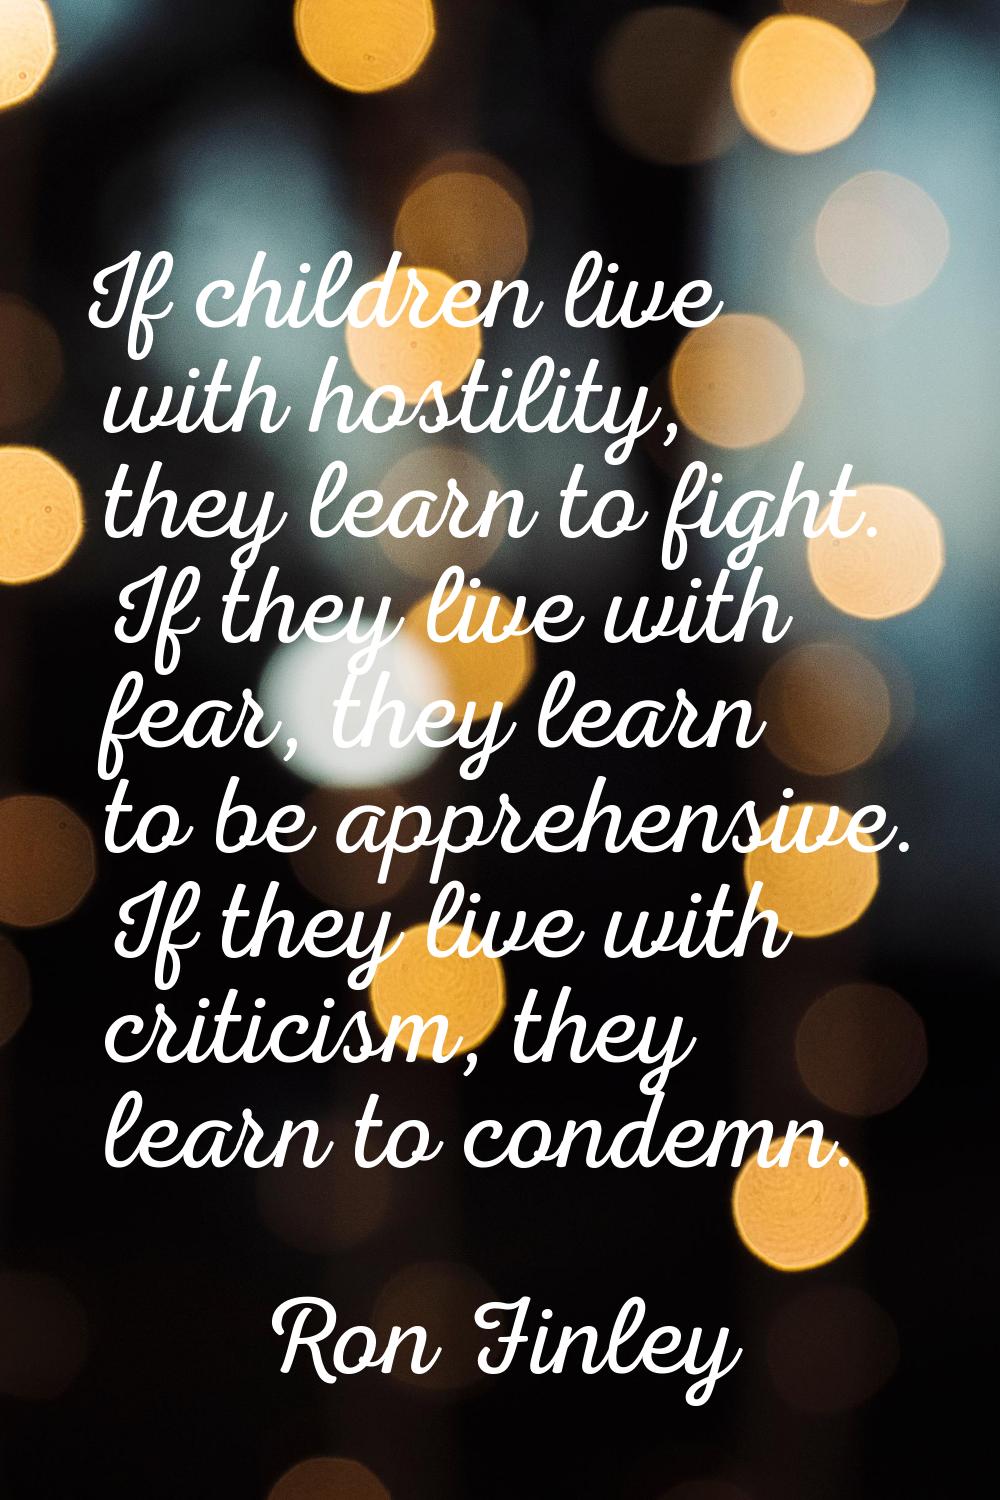 If children live with hostility, they learn to fight. If they live with fear, they learn to be appr